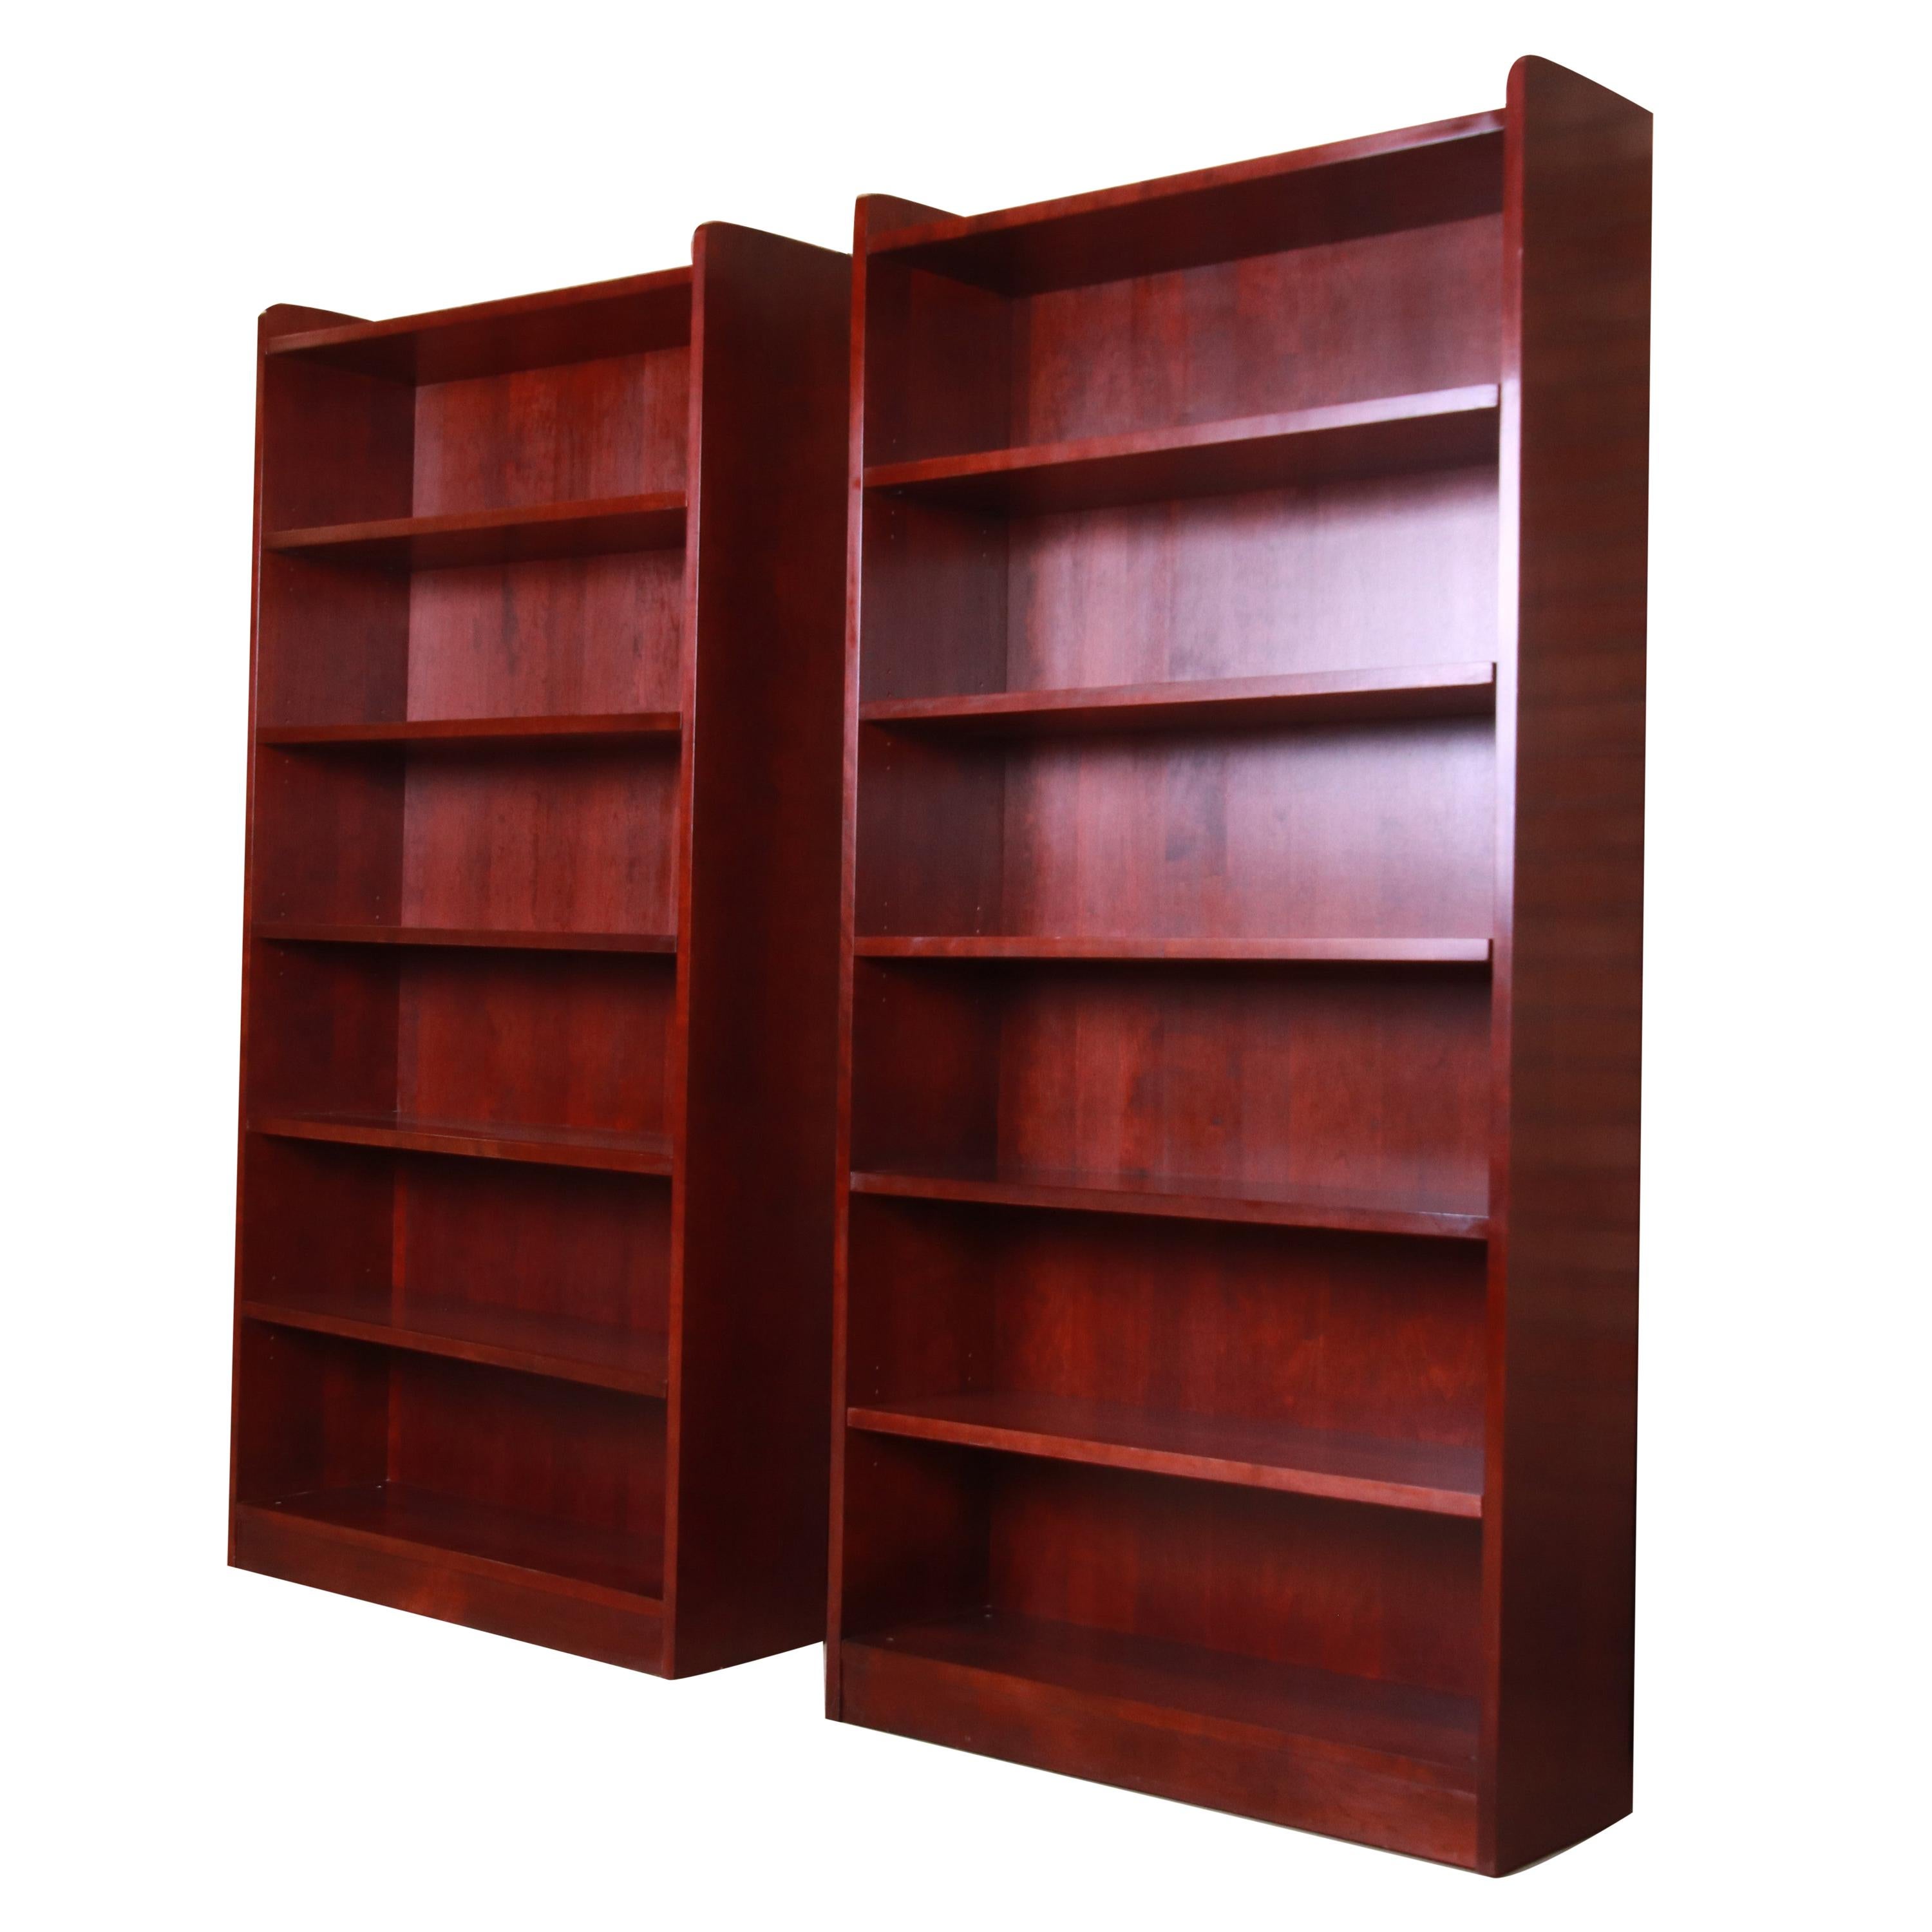 Stickley Arts & Crafts Cherrywood Tall Bookcases, Pair